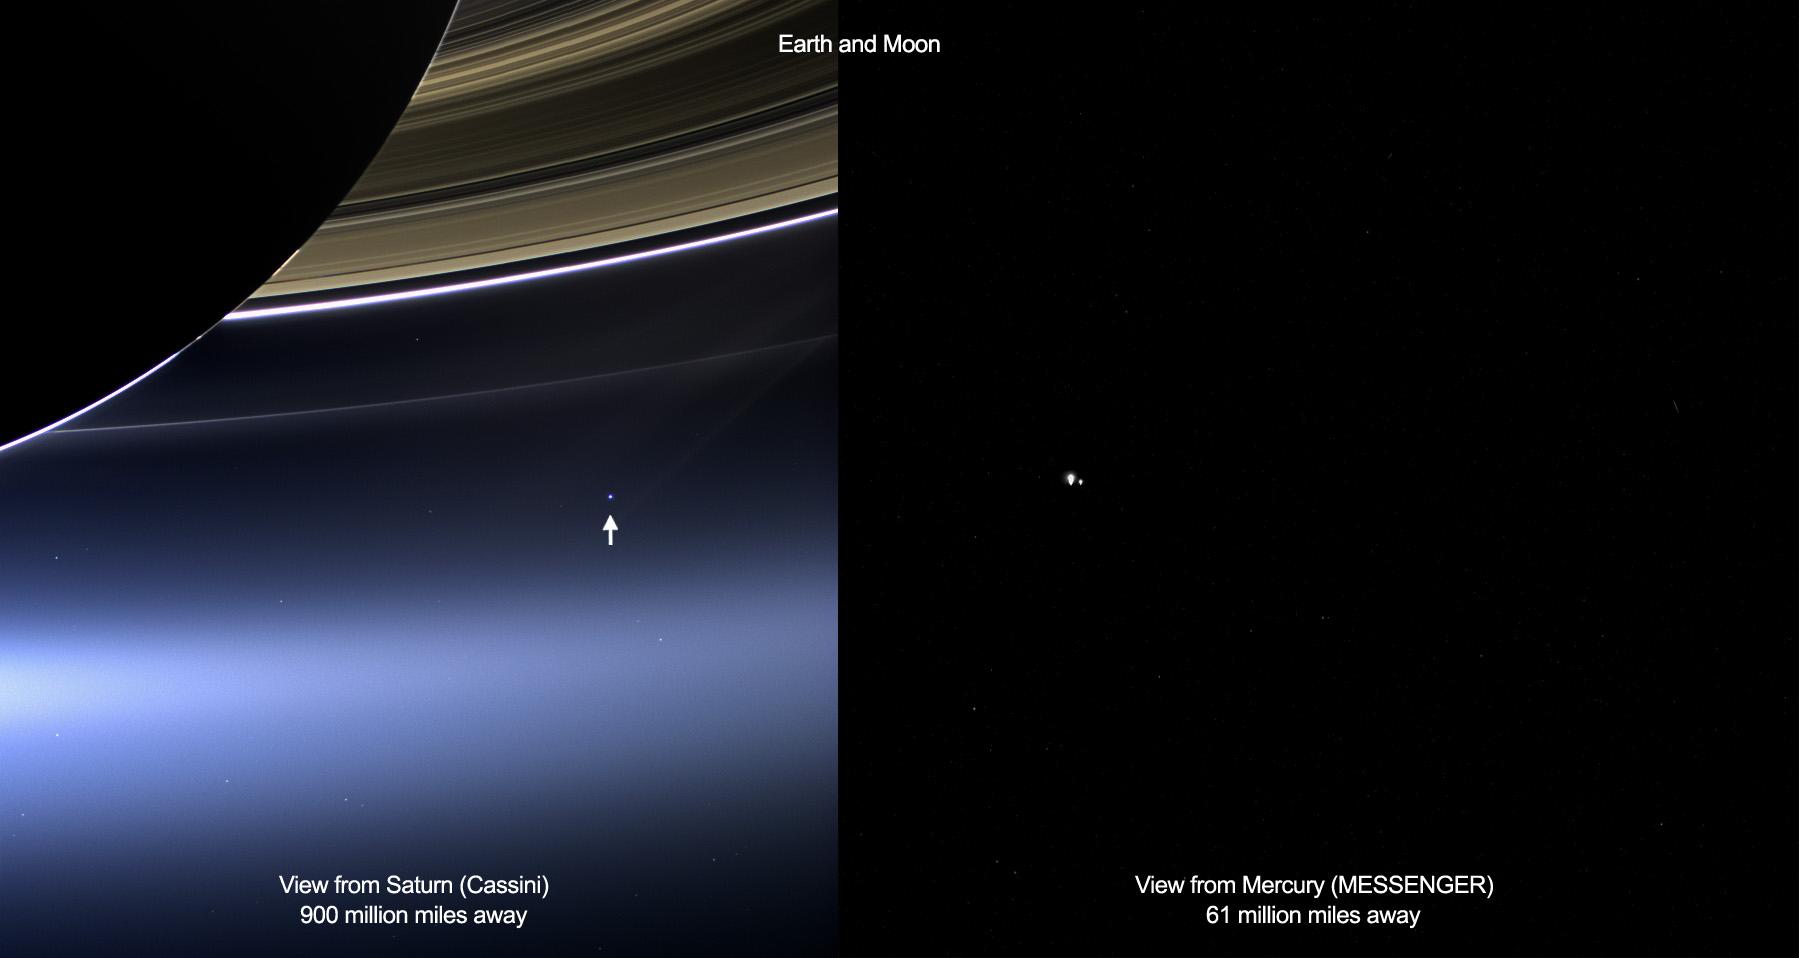 These images show views of Earth and the moon from NASA's Cassini (left) and MESSENGER spacecraft (right) from July 19, 2013.